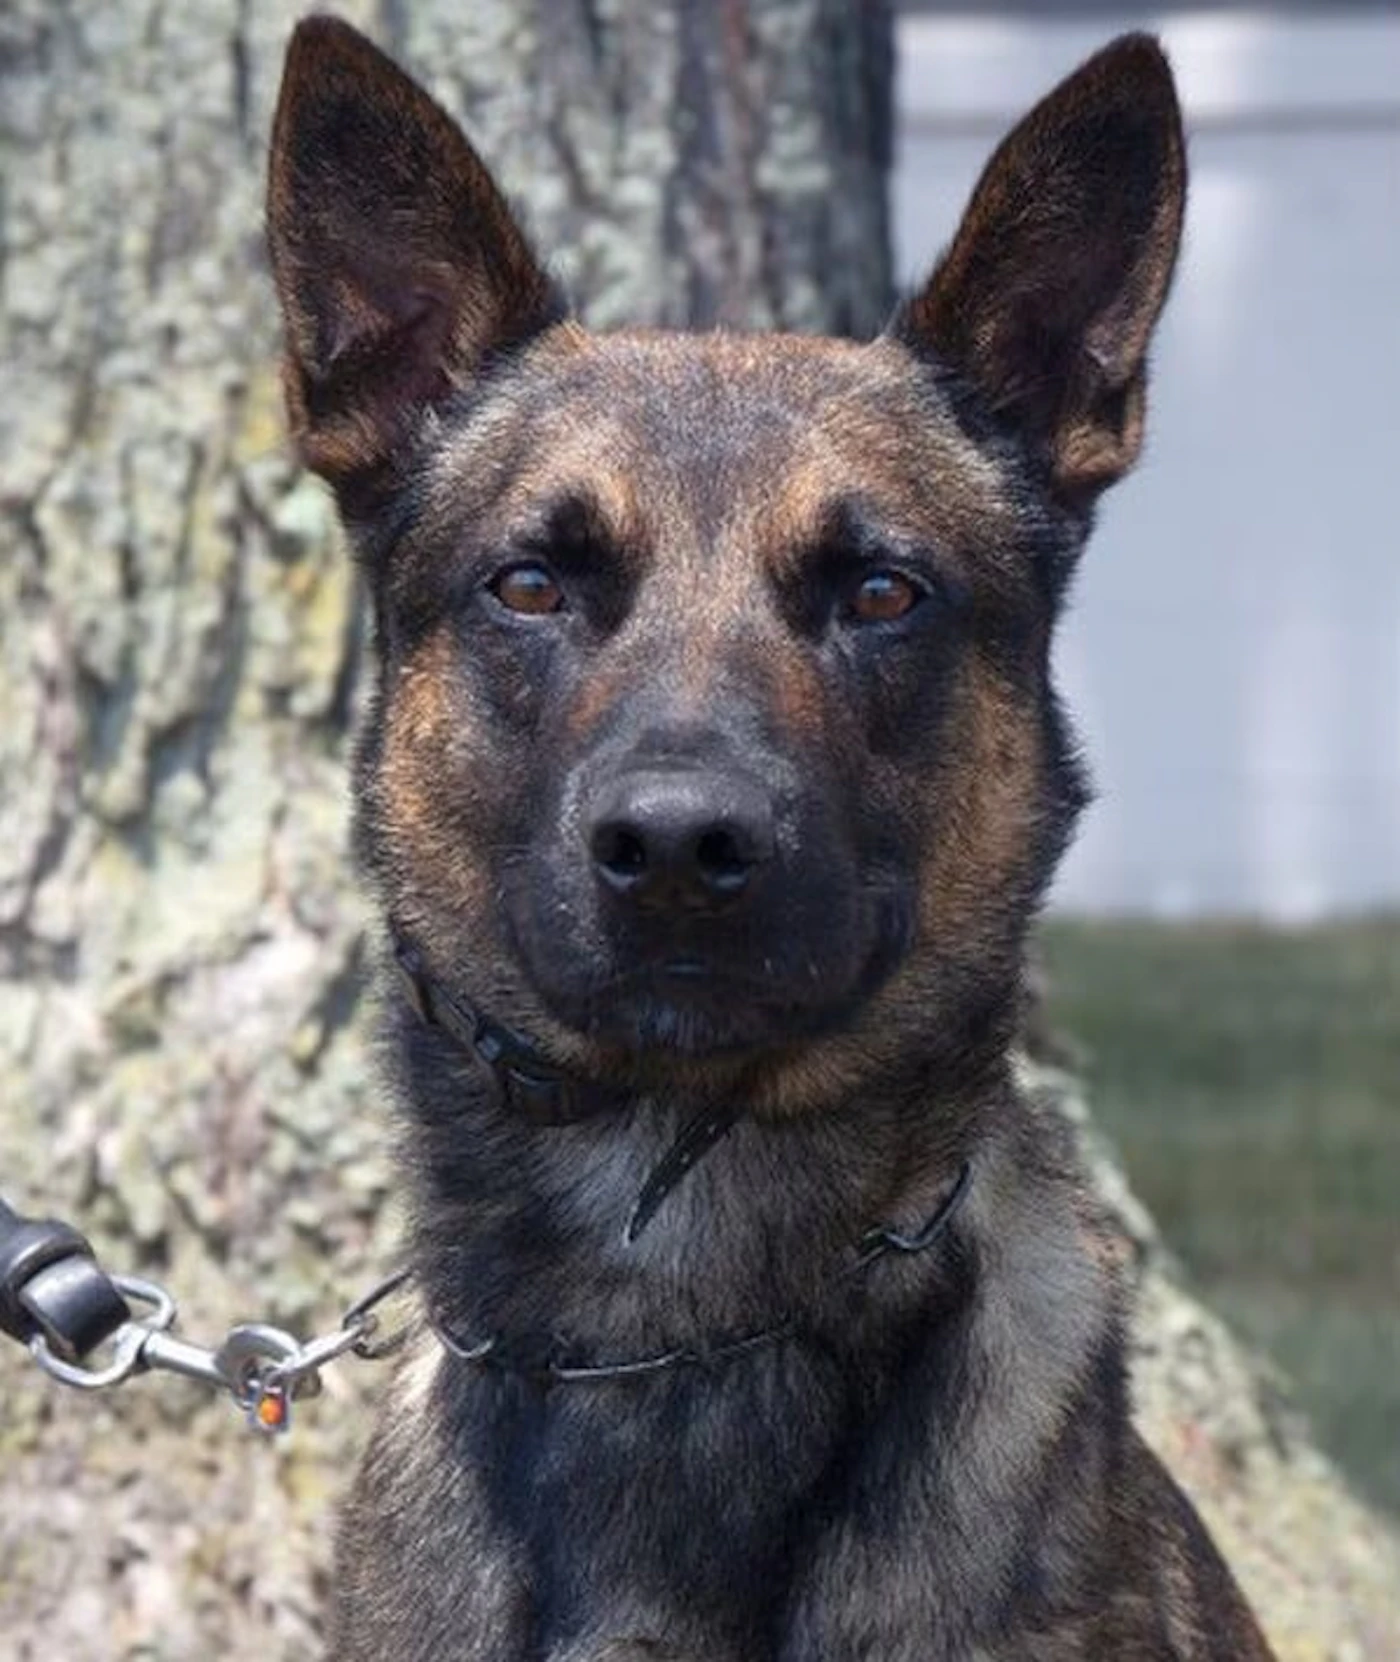 Yoda, a search dog for Customs and Border Patrol, helped authorities capture escaped murderer Daniel Cavalcante in Chester County on Sept. 13, 2023. (Photo: US Customs and Border Patrol)